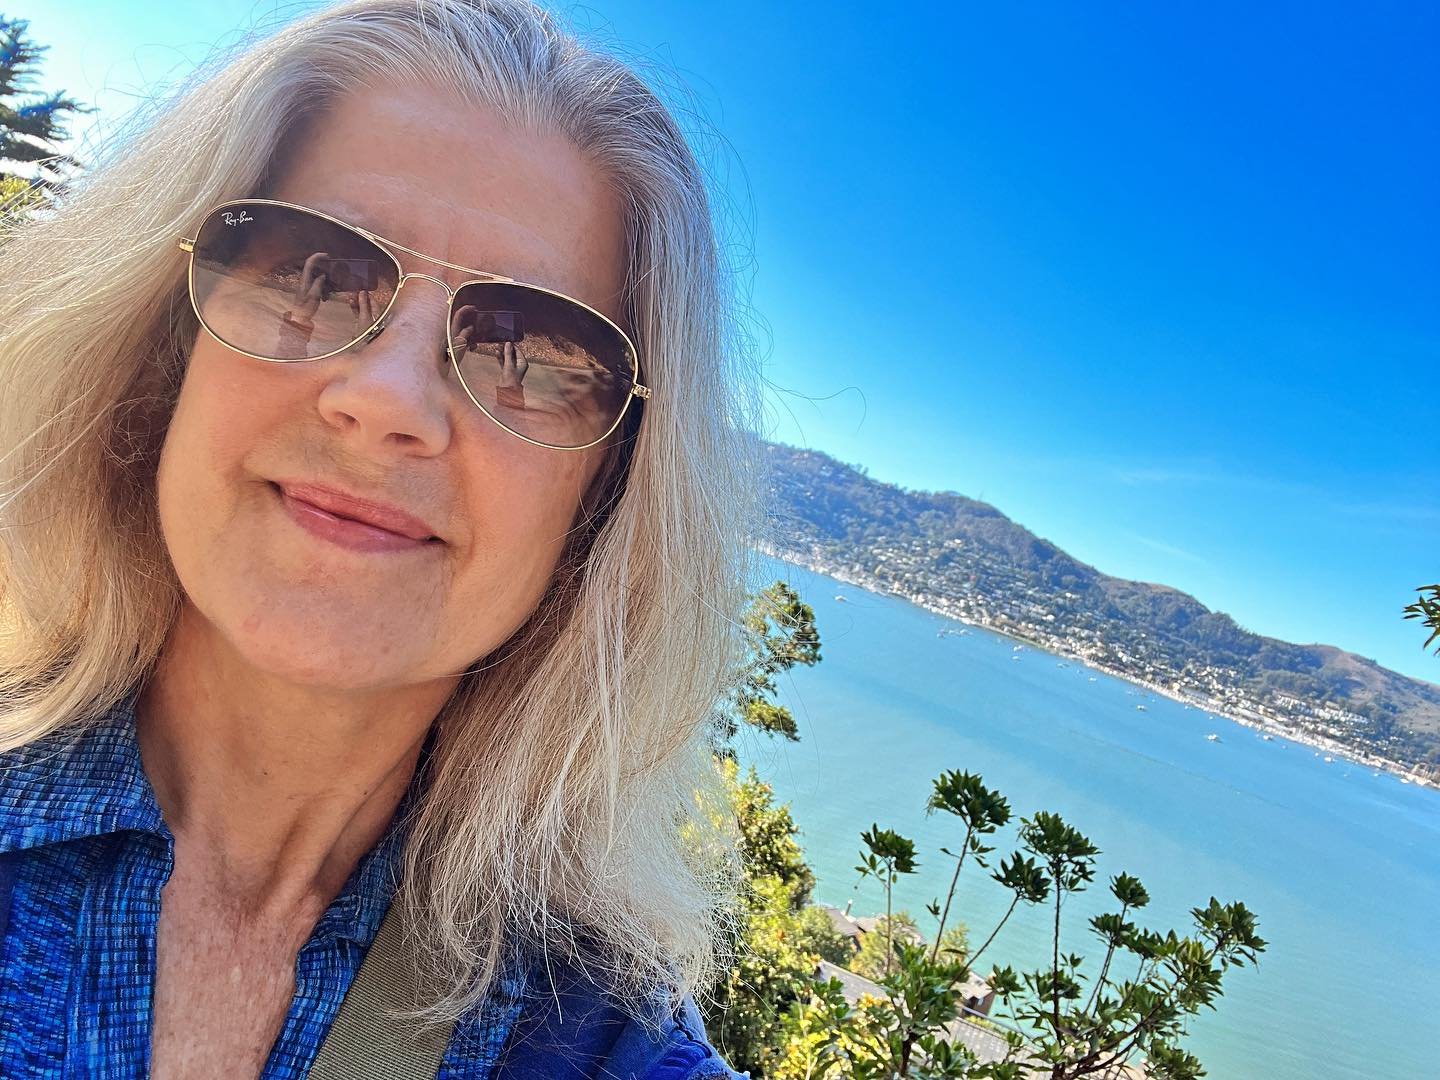 Notes from the Bay Area. The noise aside, human, mental and otherwise, a morning like this, looking over at Sausalito and &ldquo;my&rdquo; hills, feels utterly precious. The area has surely changed, but it is easy to live into the dream &hellip; for 